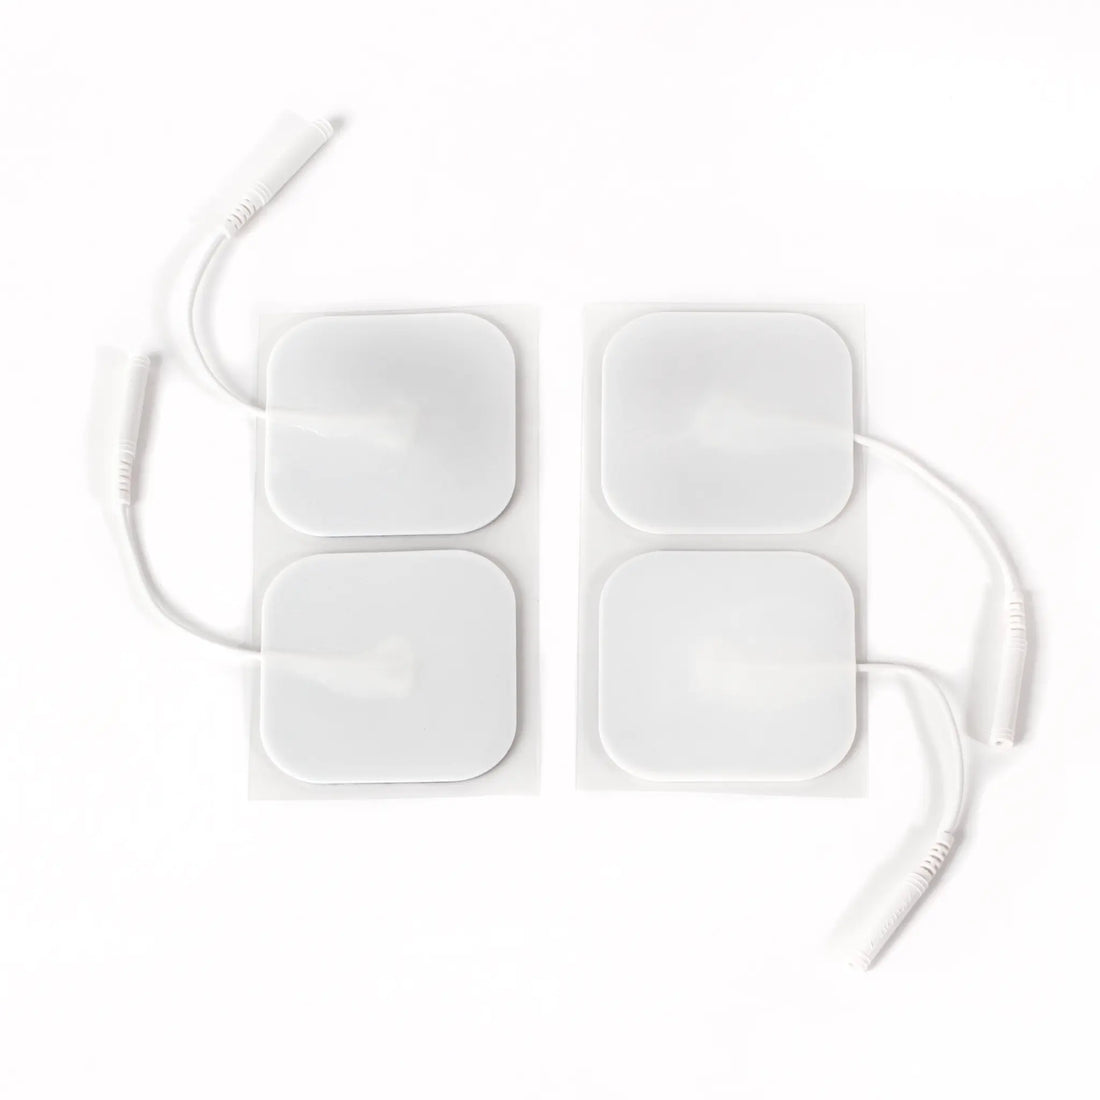 2x2 conductive pads that are square made of white foam